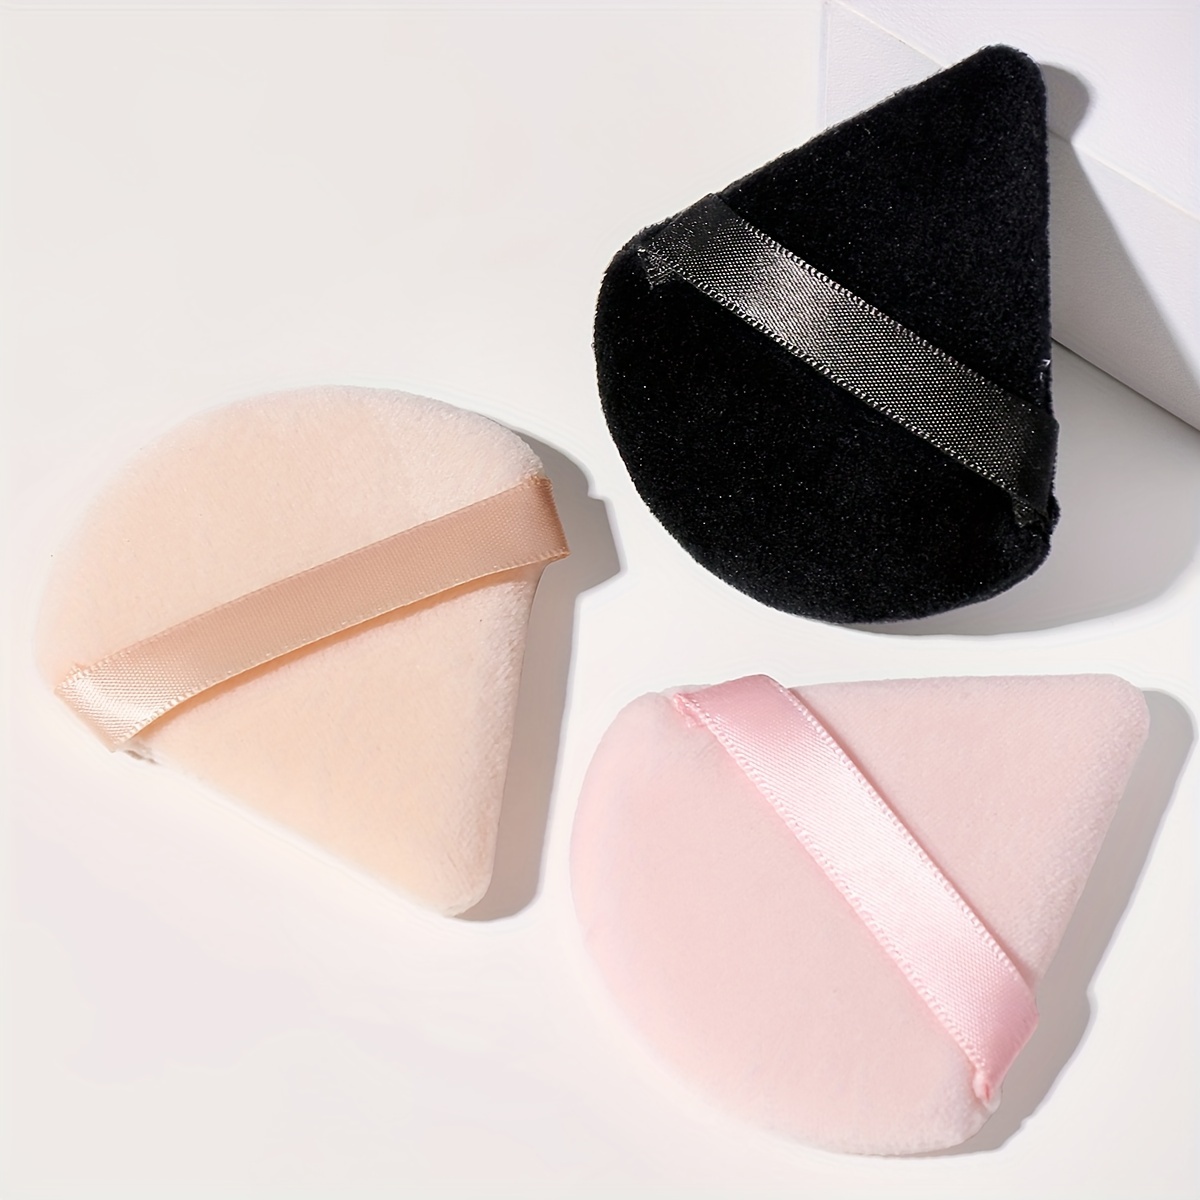 

3pcs Triangle Makeup Puff Loose Powder Puff Make Up Sponge Face Foundation Concealer Cosmetics Beauty Setting Pure Cotton Face Make Up Tool, Beauty Blender